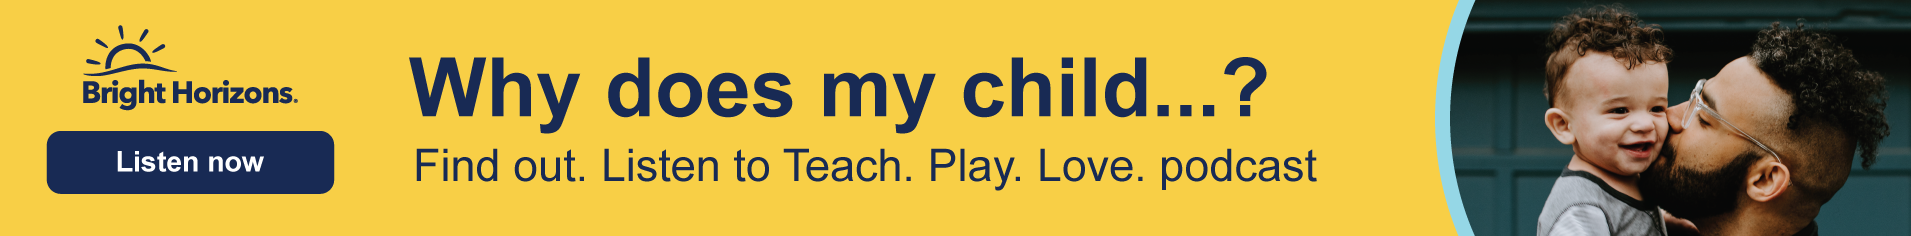 https://voiceamerica.com/shows/4203/be/Teach. Play. Love - WLE Ad Banner 1.png